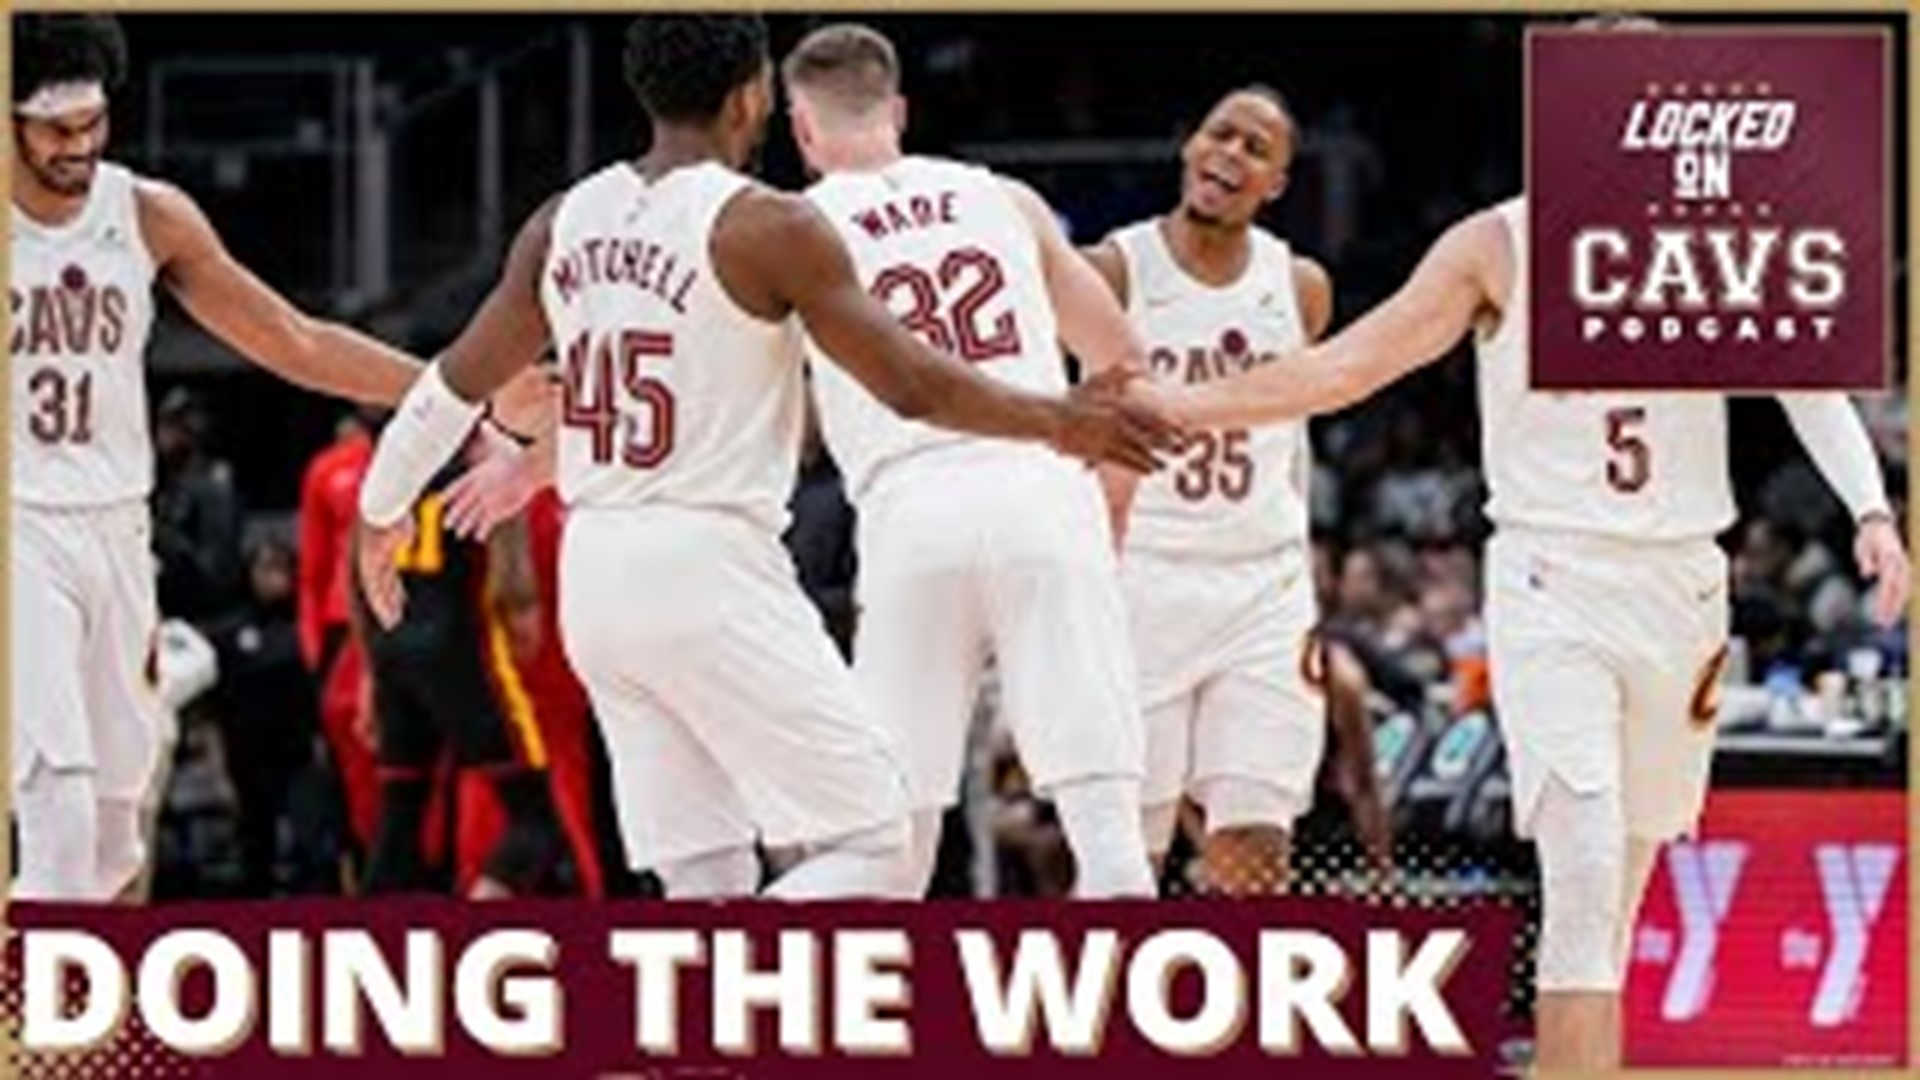 On a new episode of Locked on Cavs host Chris Manning goes solo to talk about the Cavs' win in Atlanta, how the Cavs keep on just rolling.